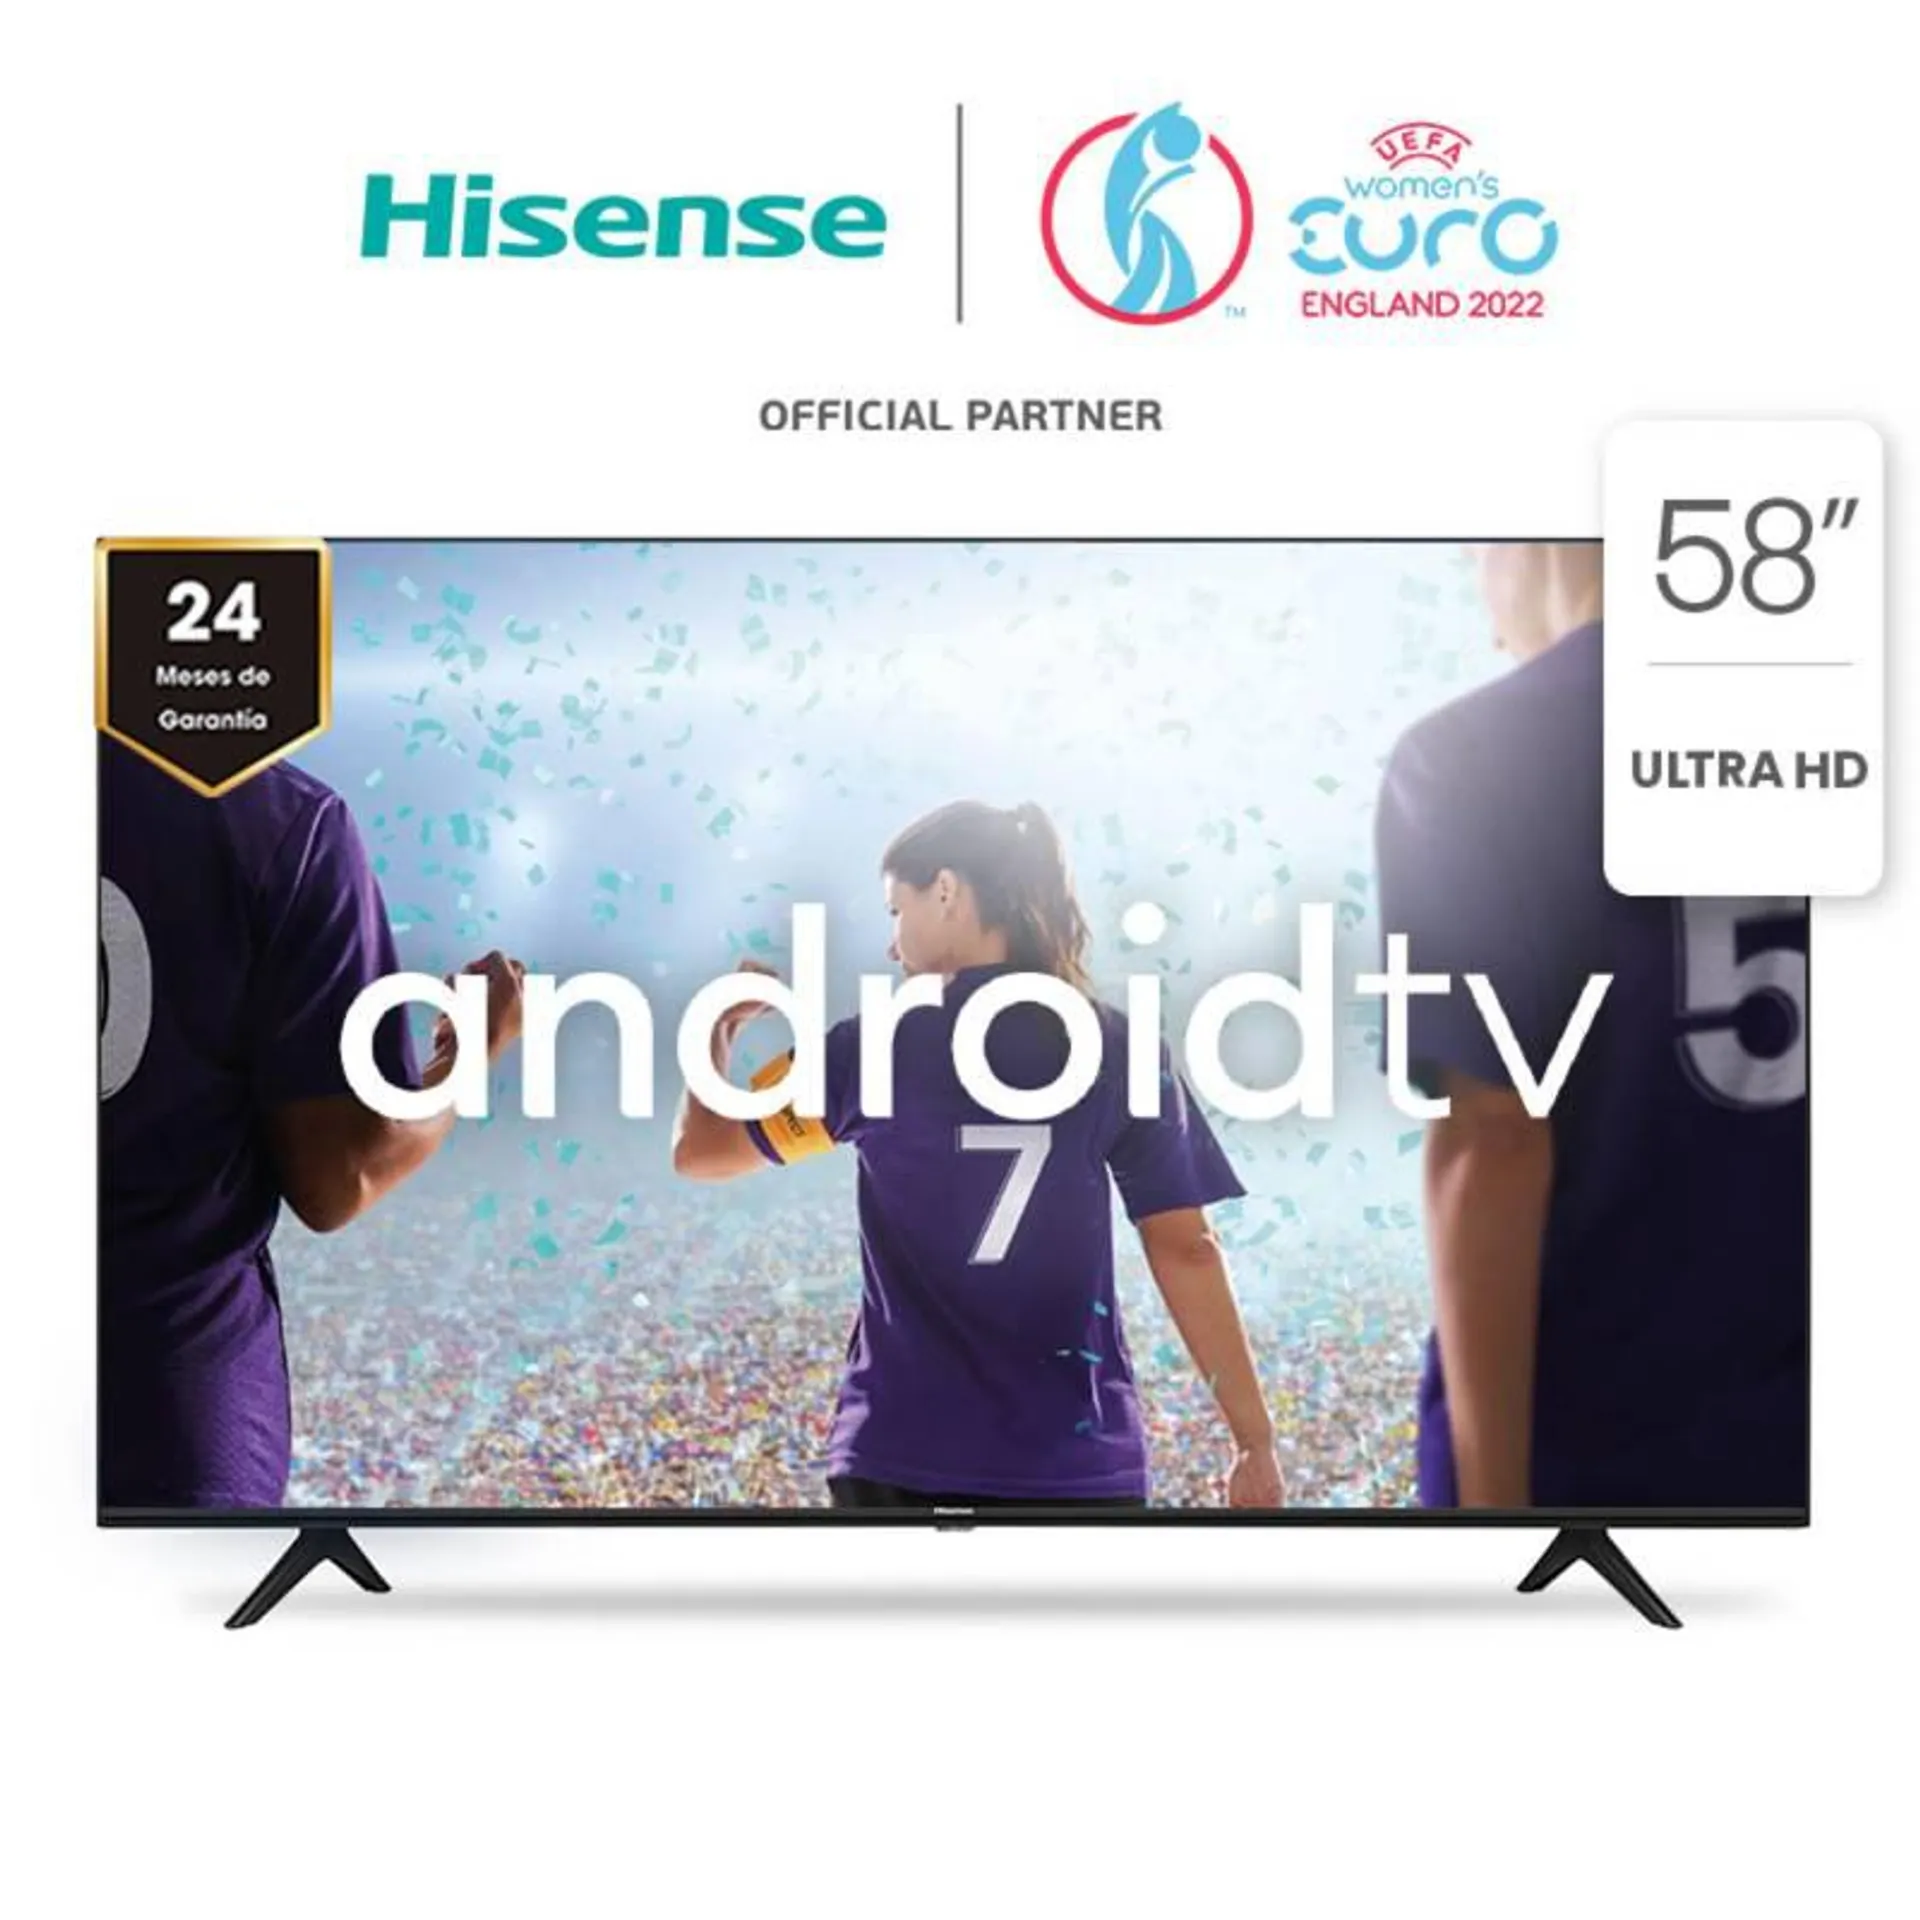 LED 58" 58A6150Fs 4K HDR Android Smart TV 2020/21